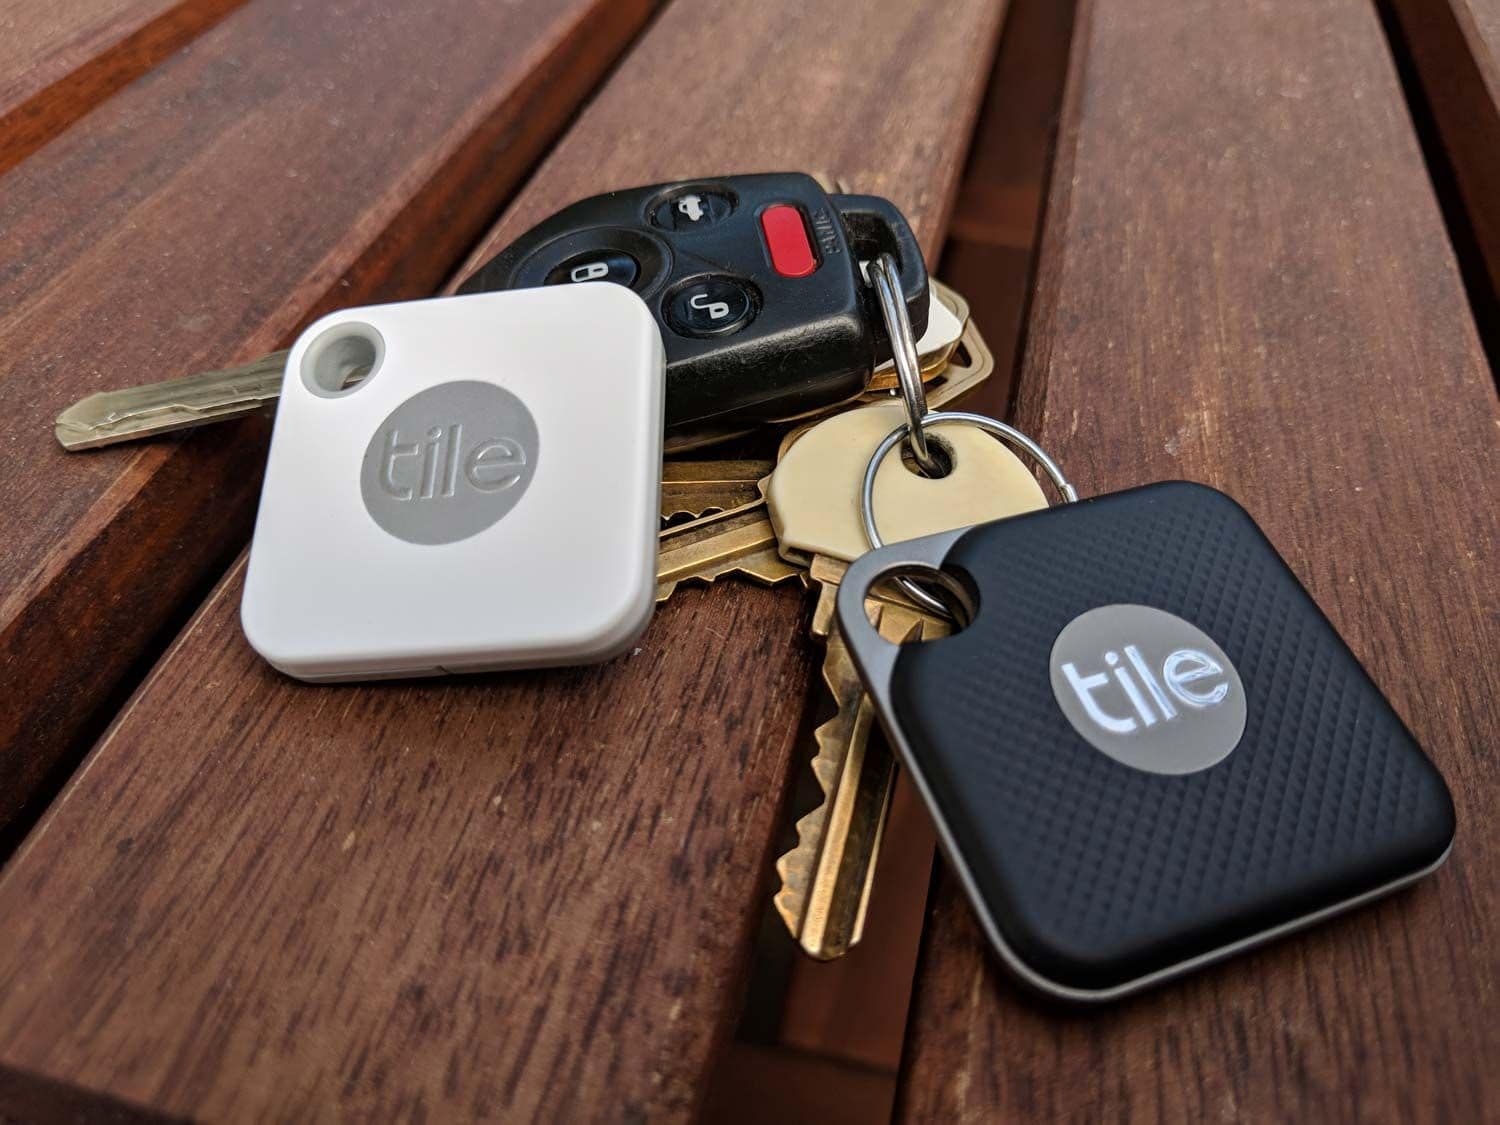 Tile Pro attached to a set of keys.